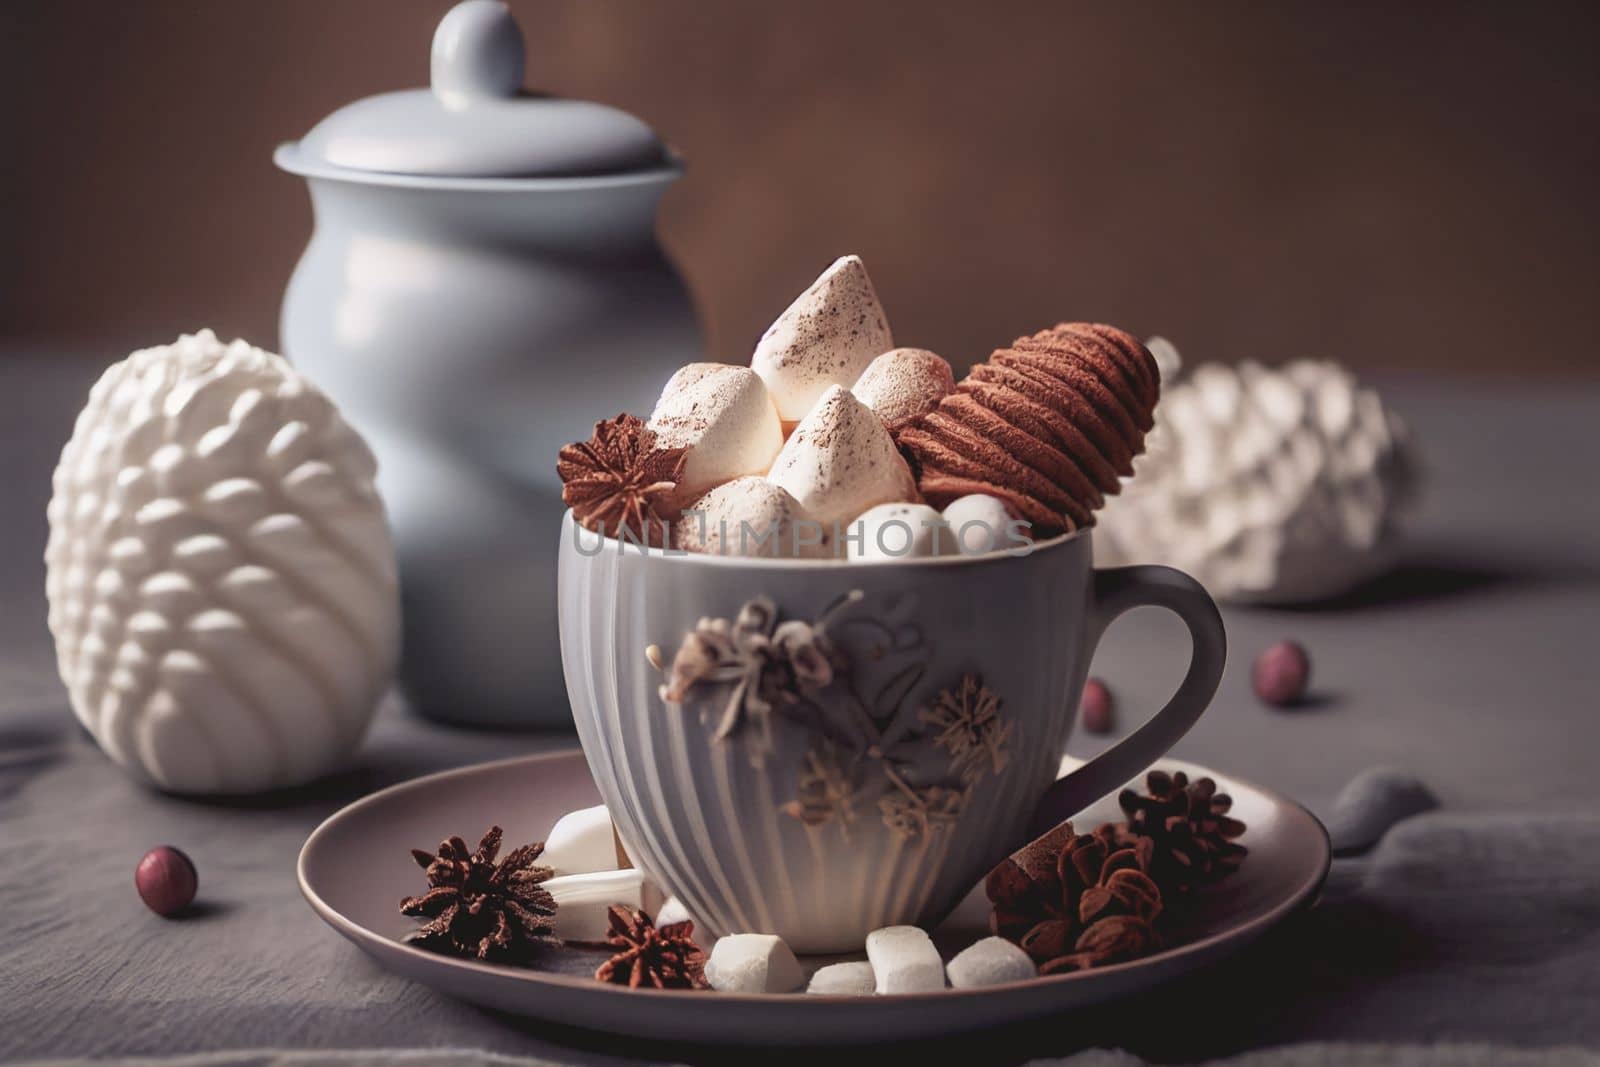 Savor a mug of hot cocoa surrounded by wintery holiday decor. Perfect for a cozy New Year's celebration. by FokasuArt